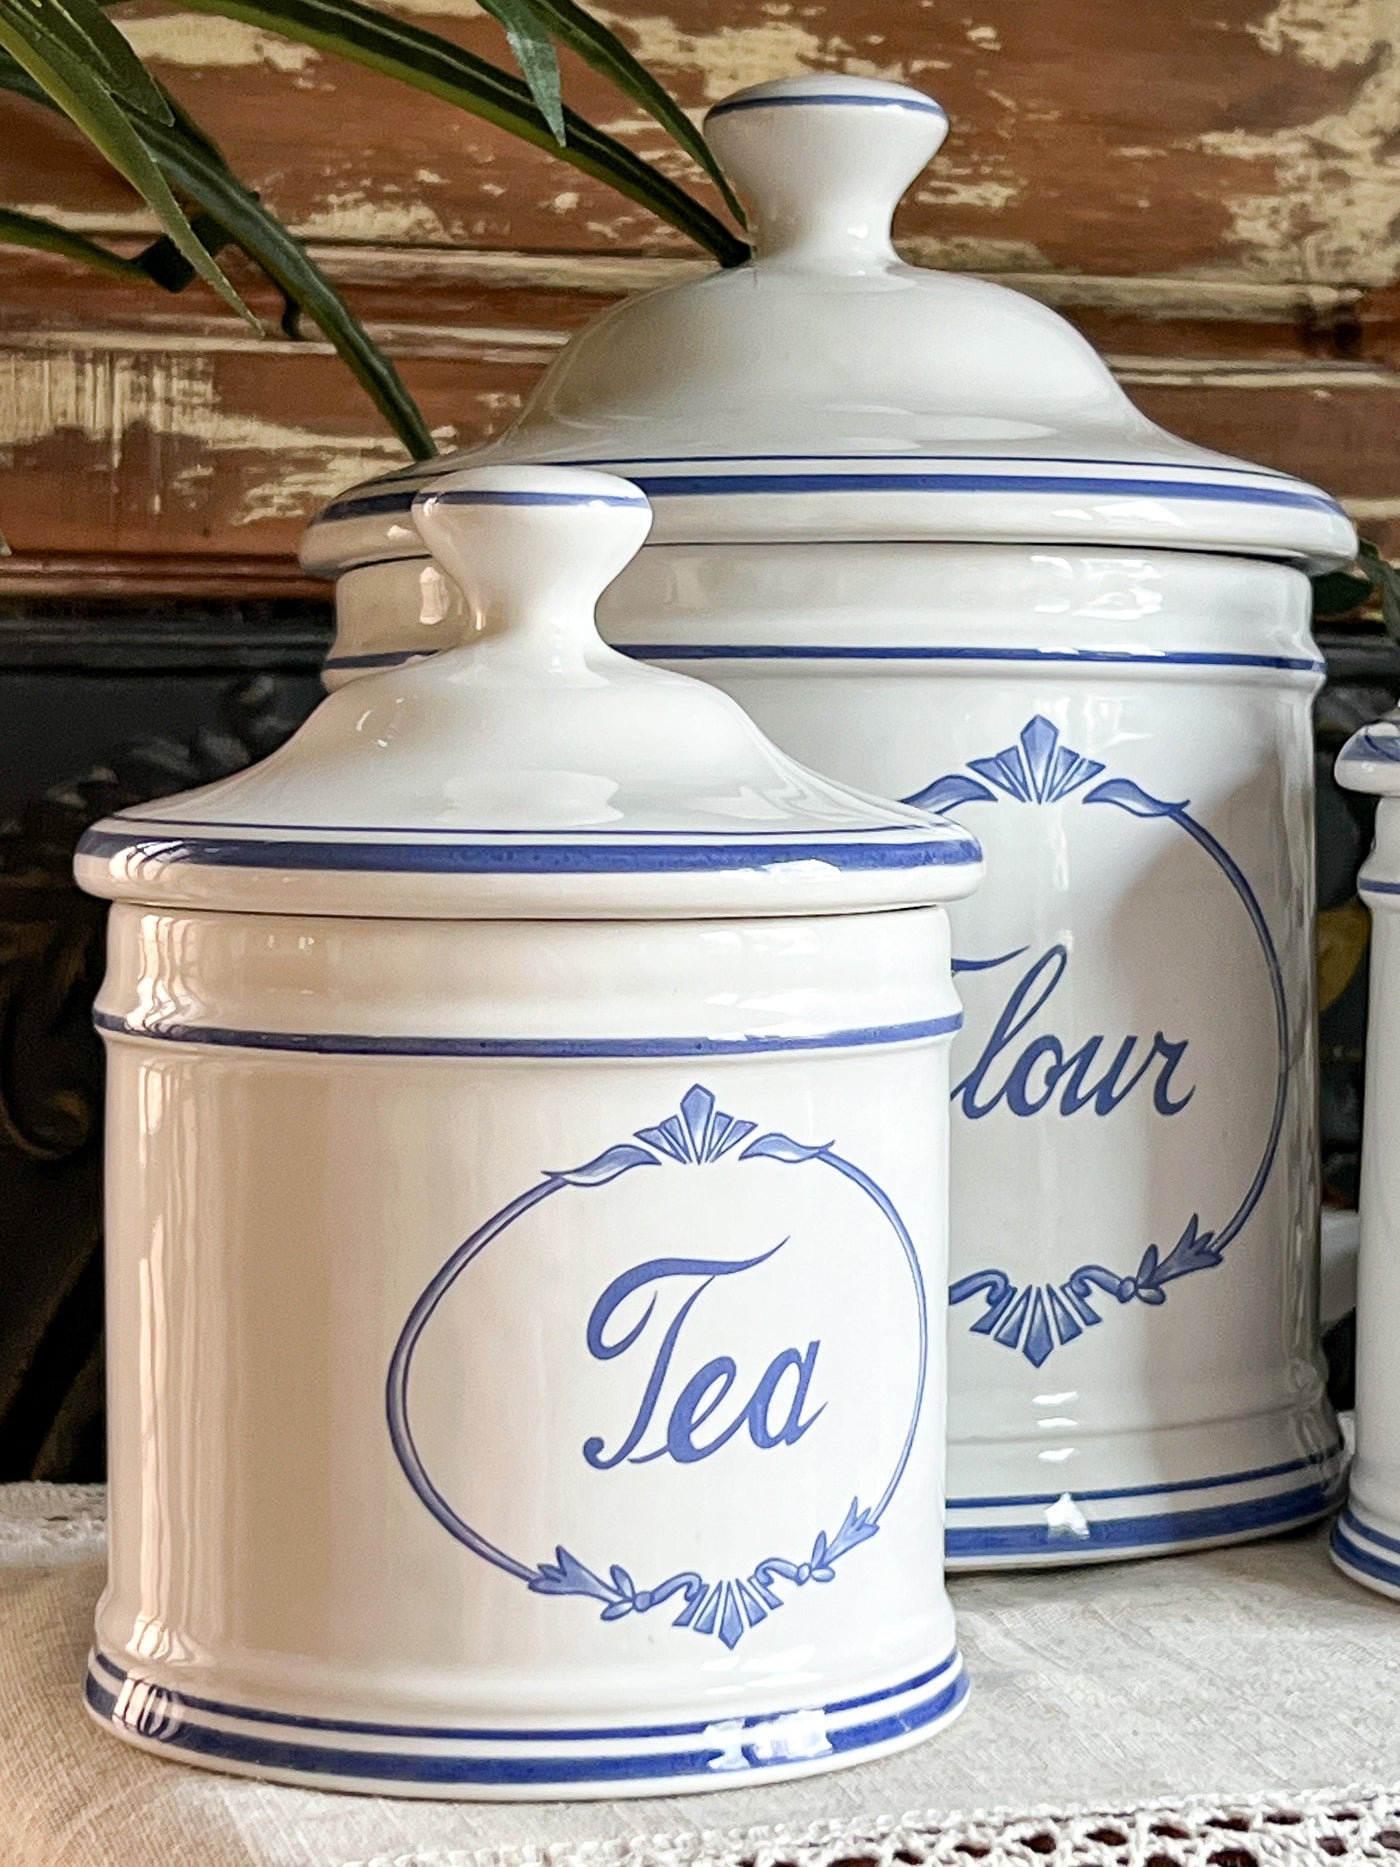 Portugal Blue & White Vintage Canister Set by Fapodel (3 piece set) Revive In Style Vintage Furniture Painted Refinished Redesign Beautiful One of a Kind Artistic Antique Unique Home Decor Interior Design French Country Shabby Chic Cottage Farmhouse Grandmillenial Coastal Chalk Paint Metallic Glam Eclectic Quality Dovetailed Rustic Furniture Painter Pinterest Bedroom Living Room Entryway Kitchen Home Trends House Styles Decorating ideas